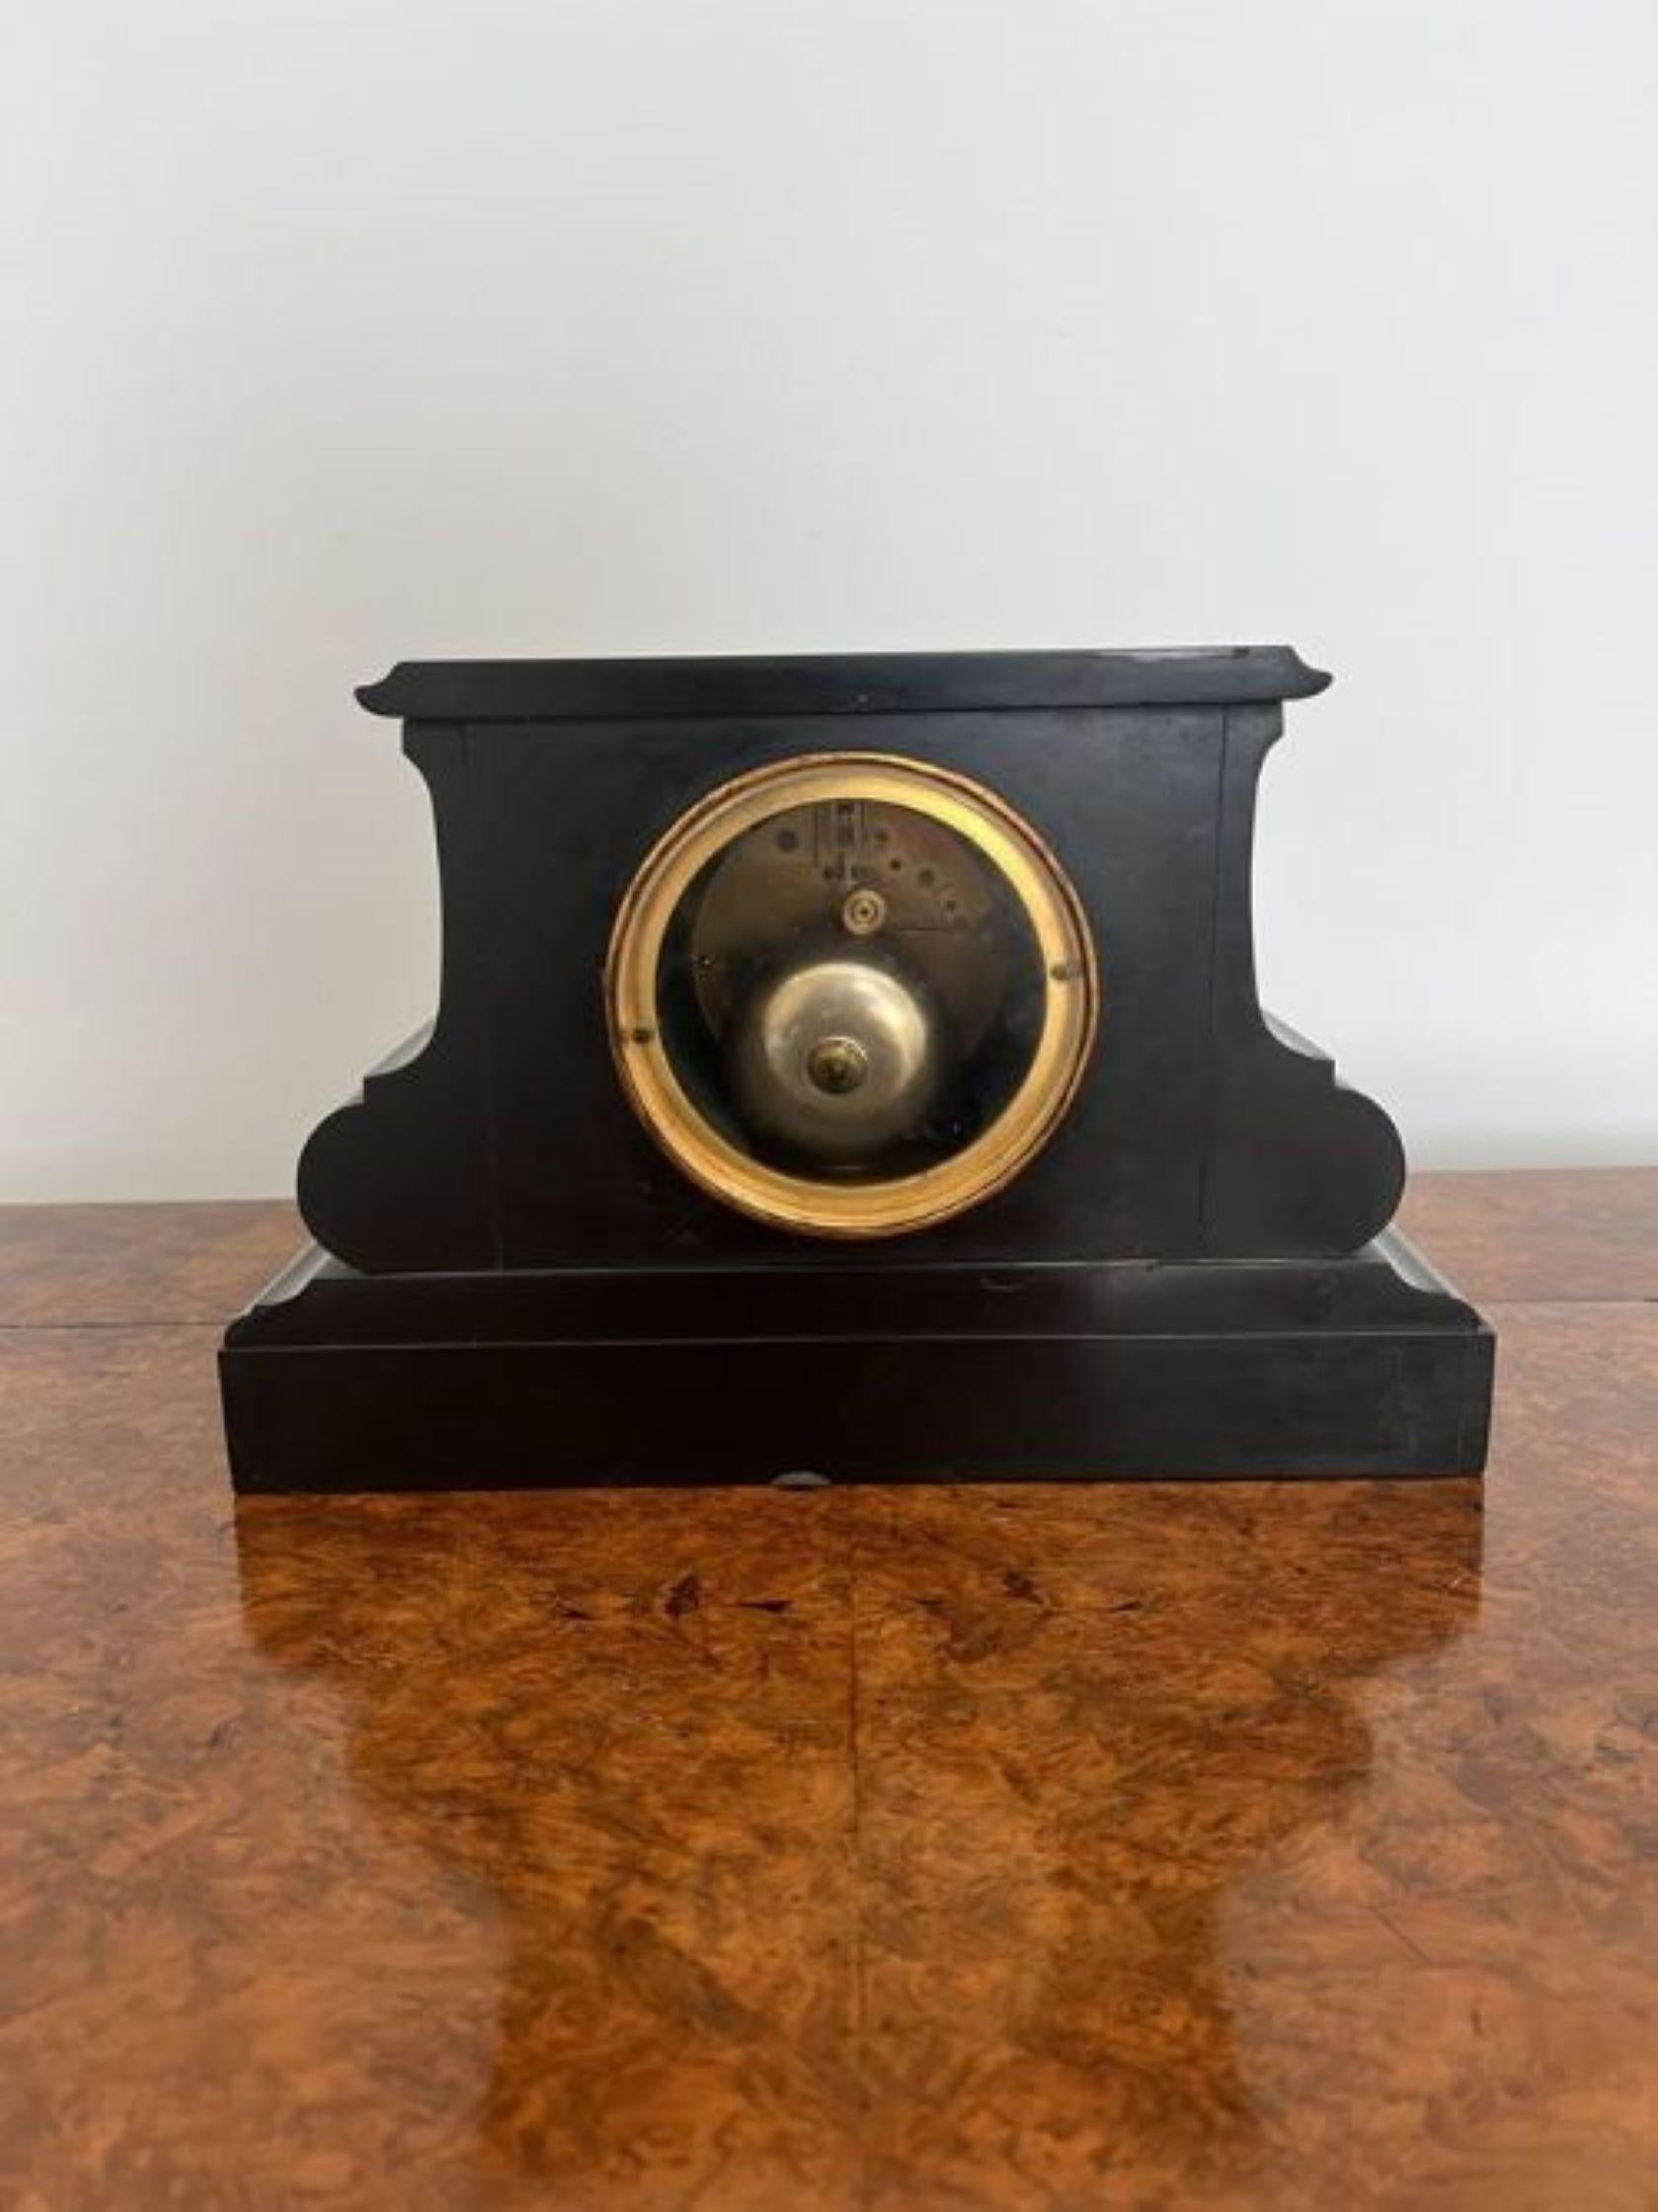 Quality antique Victorian eight day mantle clock having a quality antique Victorian black marble shaped eight day mantle clock with a black dial and gold numerals, a brass bezel and gold hands, with an eight day French movement striking the hour and